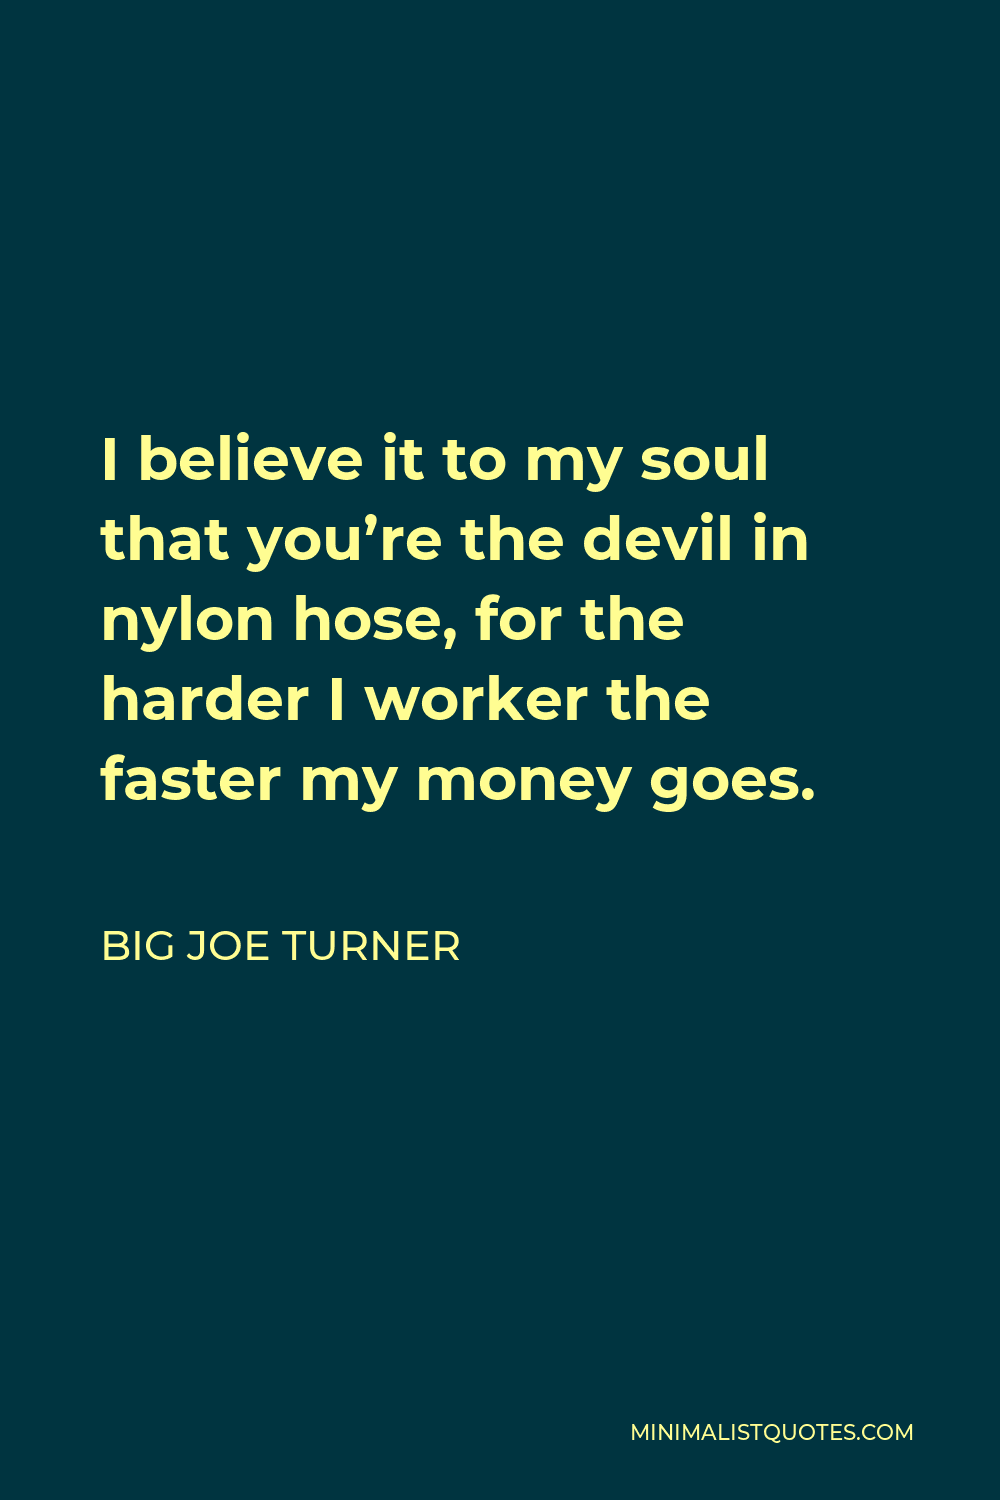 Big Joe Turner Quote - I believe it to my soul that you’re the devil in nylon hose, for the harder I worker the faster my money goes.